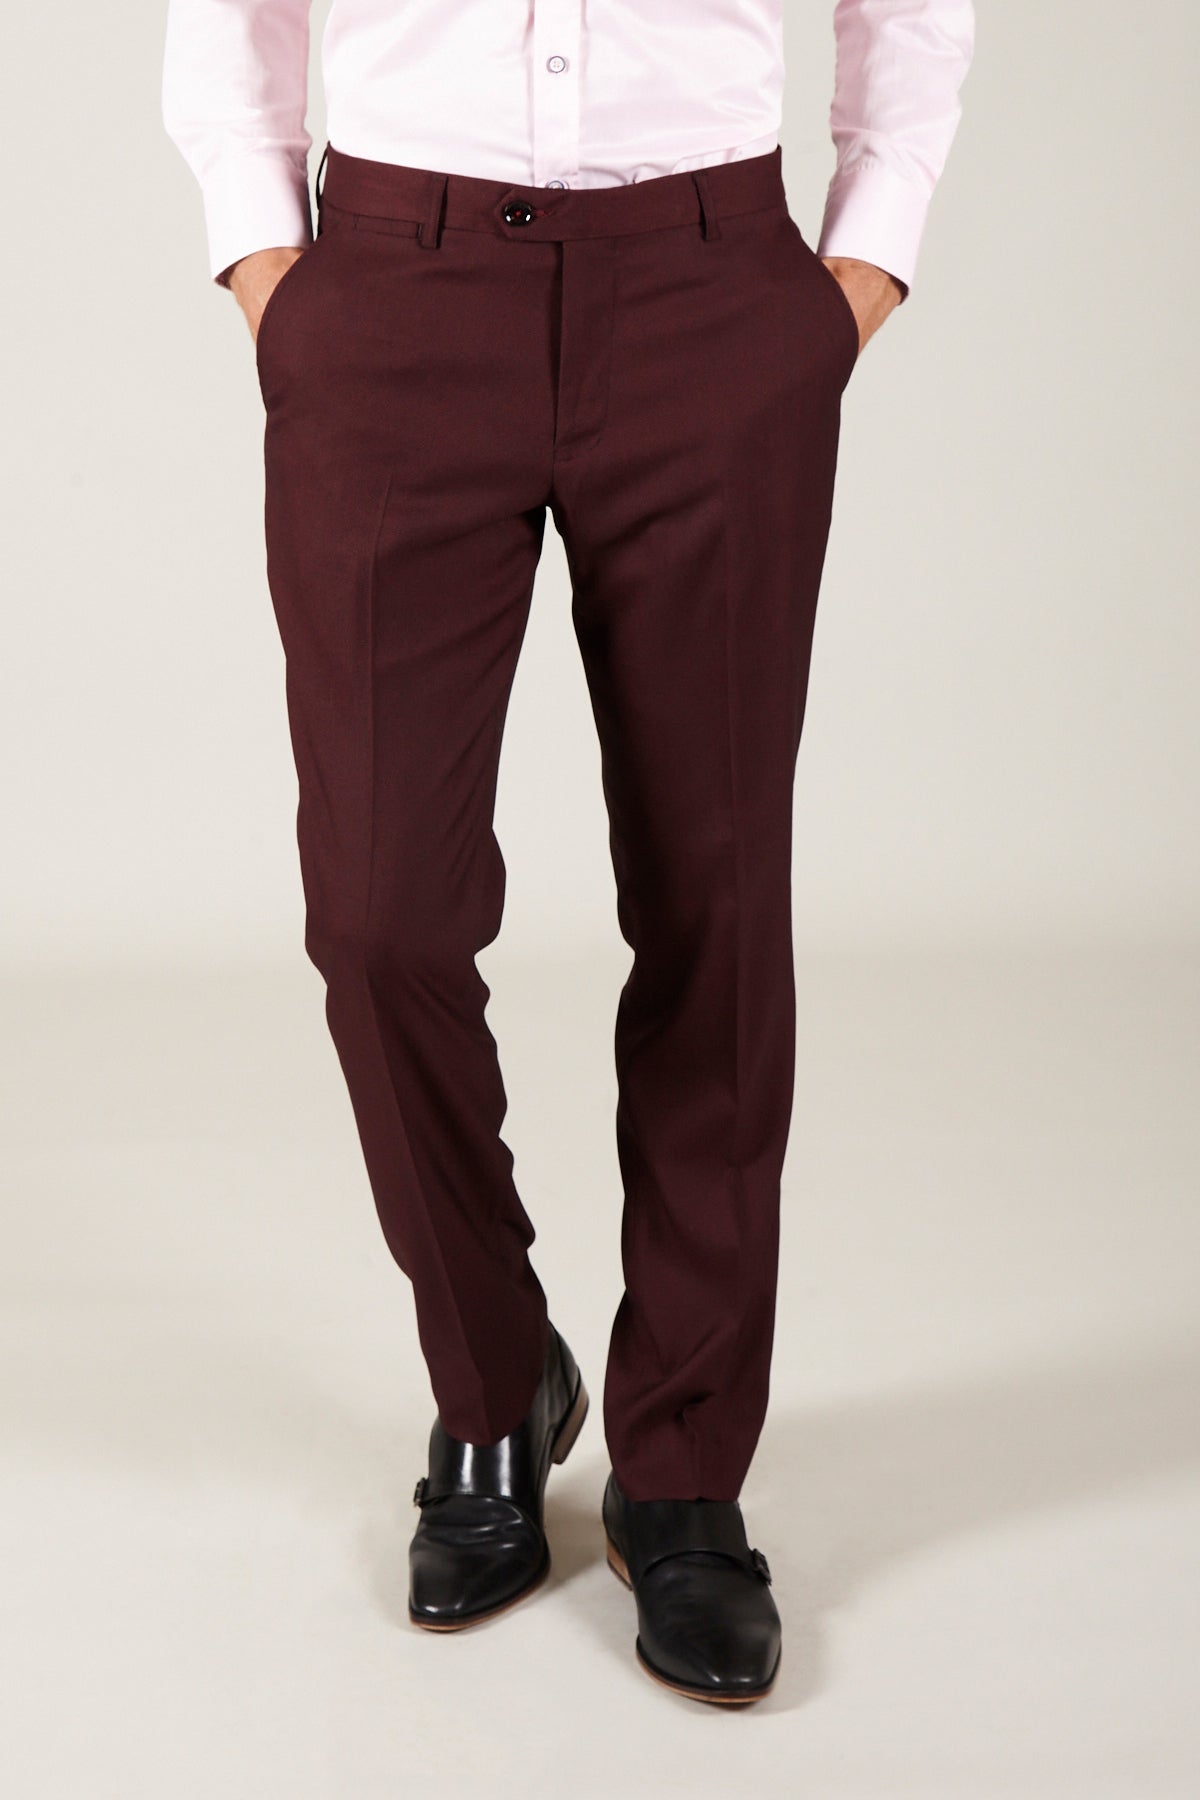 Men's Suits | Stylish, Tailored Suits for Men | Marc Darcy